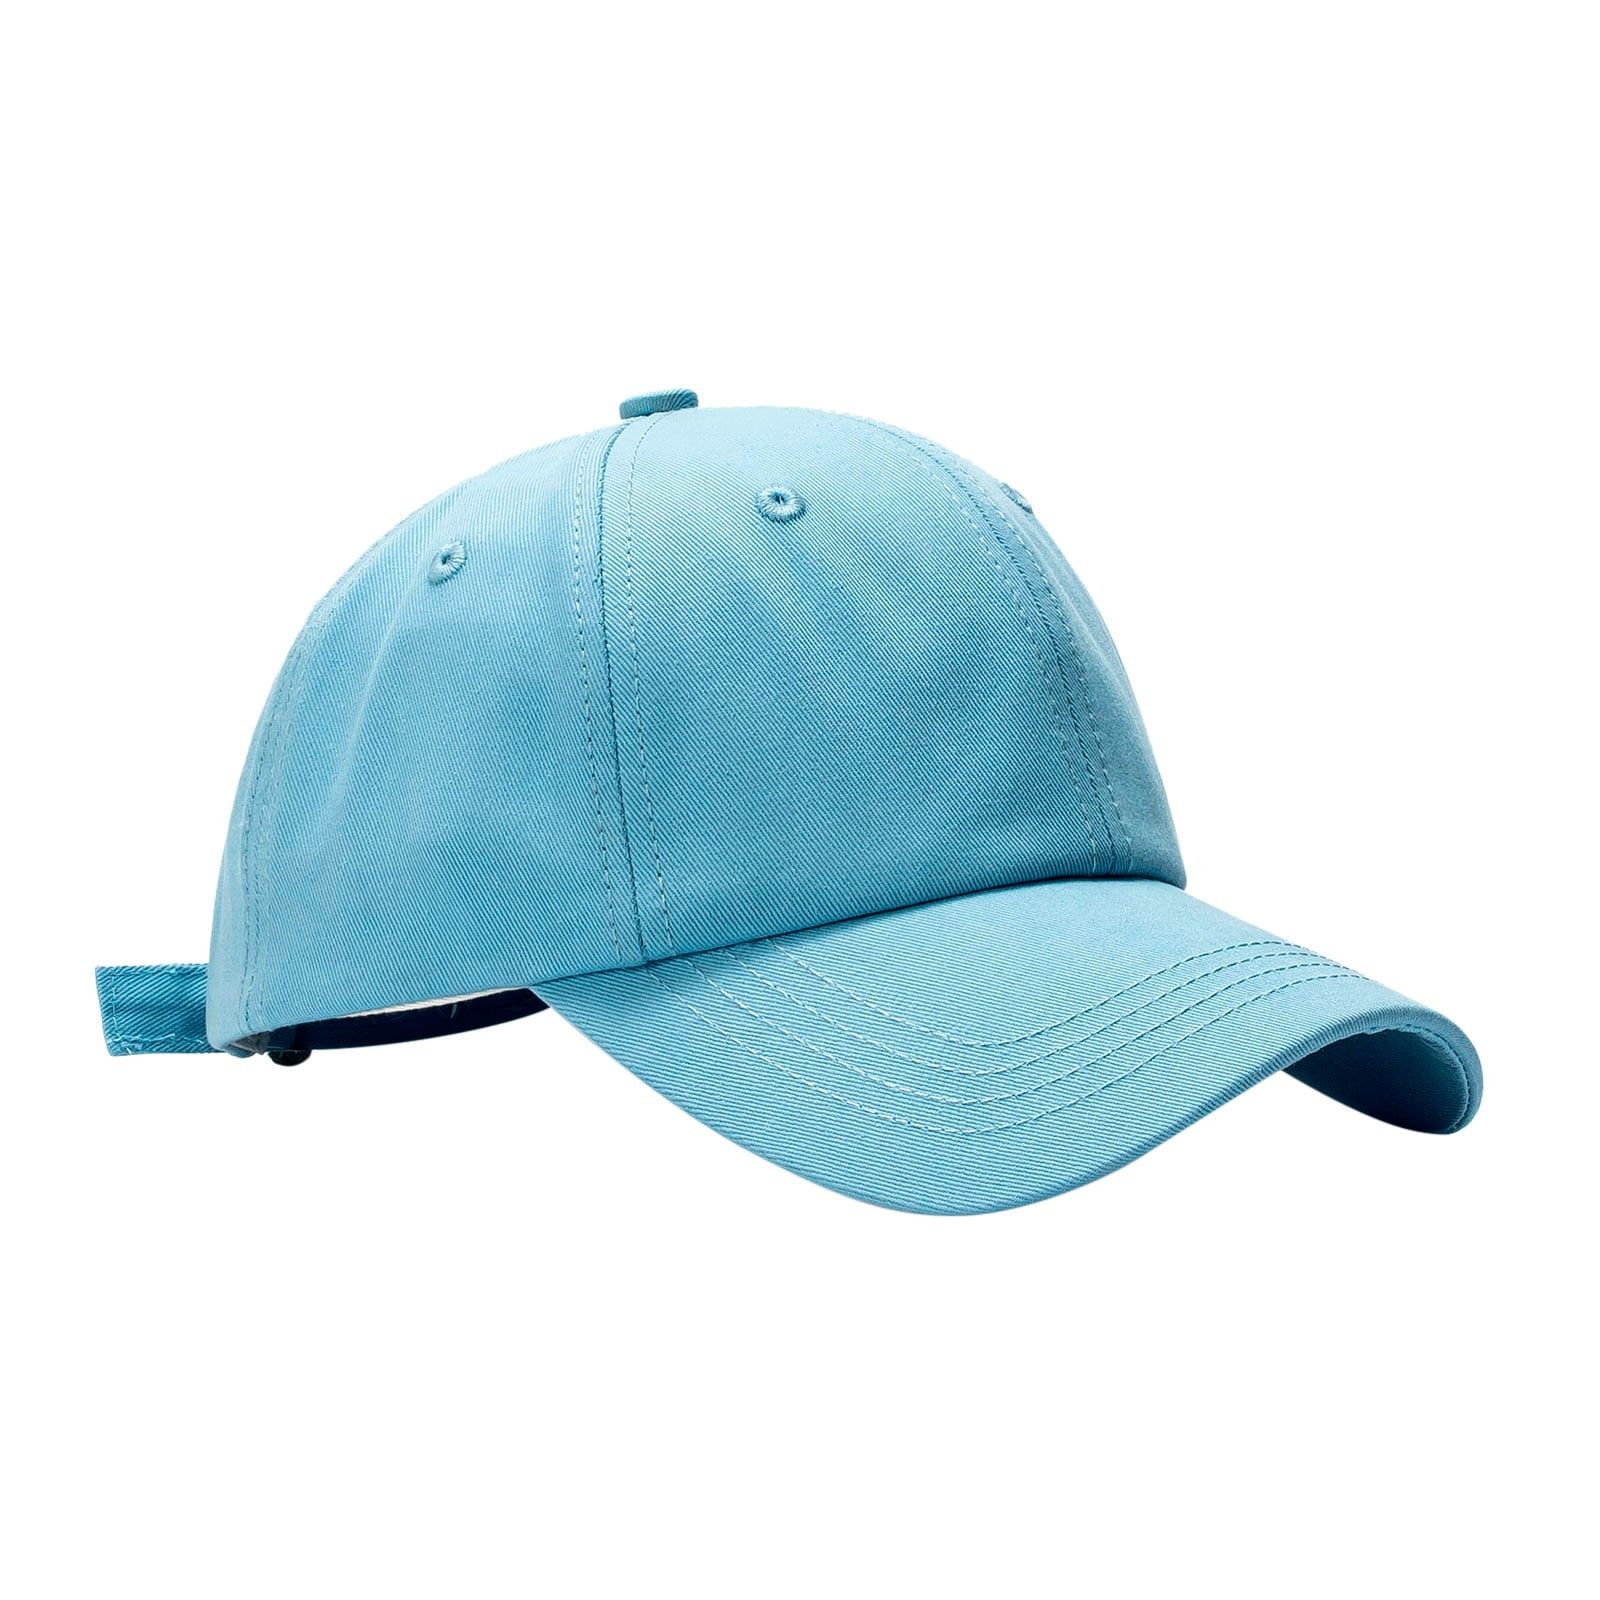 LBECLEY Hat for Women Mens and Womens Summer Fashion Casual Sunscreen  Baseball Caps Cap Hats Bulk Baseball Cap Hats for Men Women Light Blue One  Size 